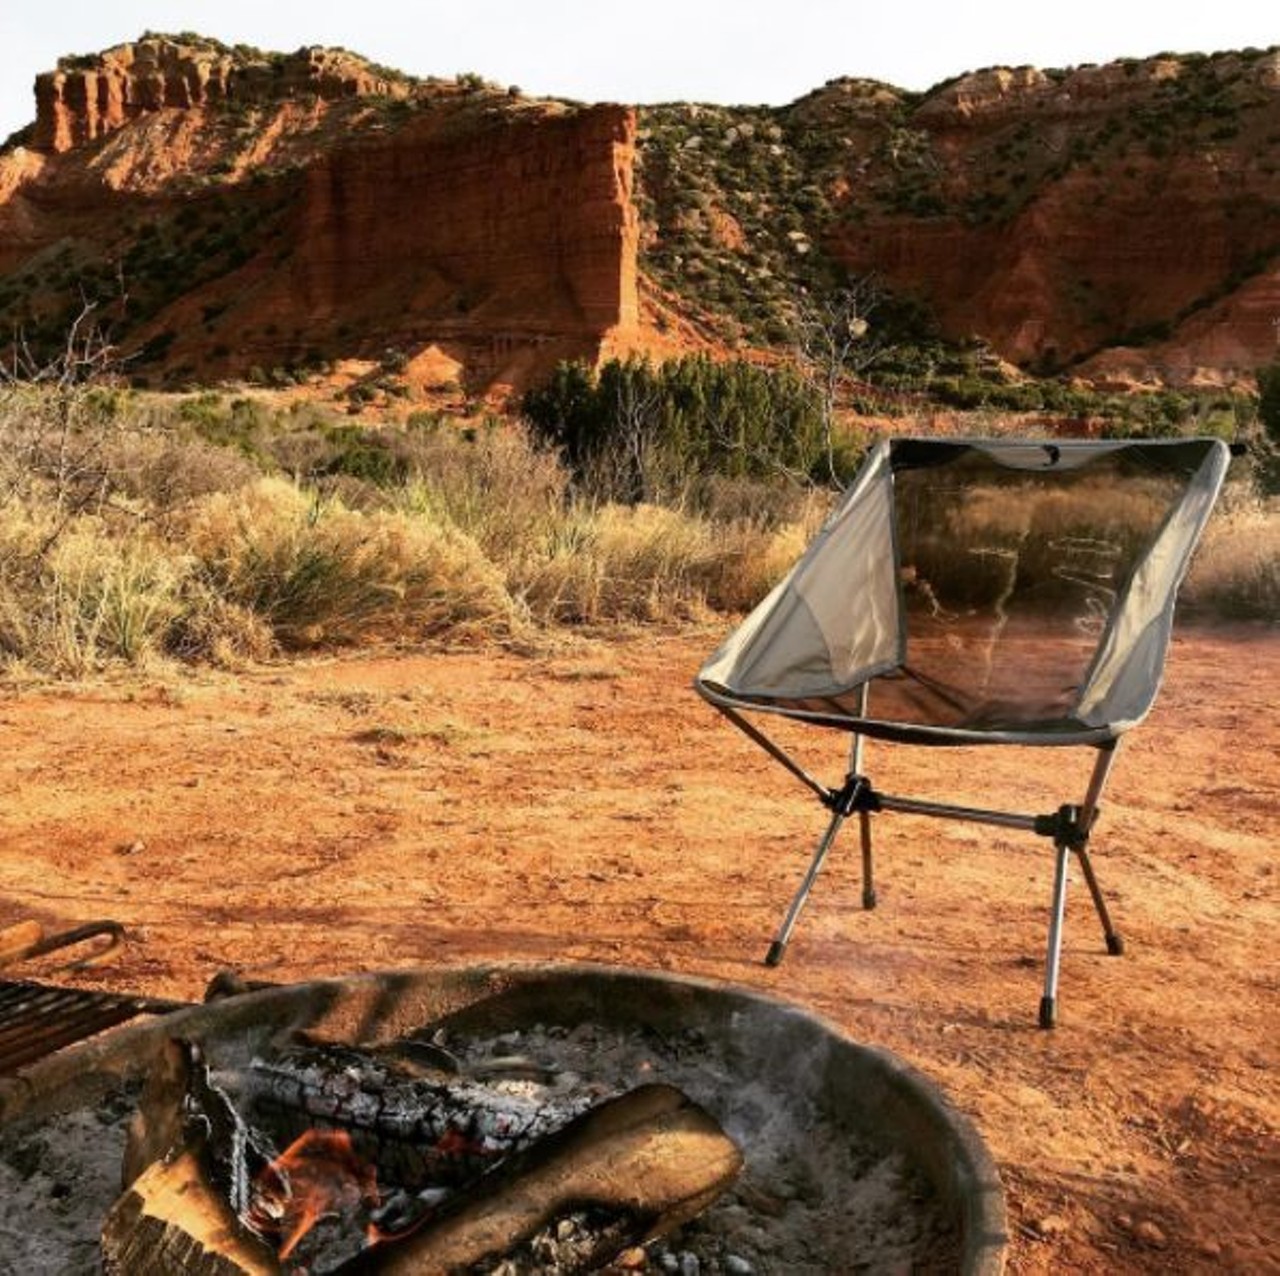 Caprock Canyons State Park850 Caprock Canyon Park Road, Quitaque
We promise that the six-hour drive will be totally worth it.Hike, go horseback riding or just enjoy being away from the city.
Photo via Instagram, im_collintheshots